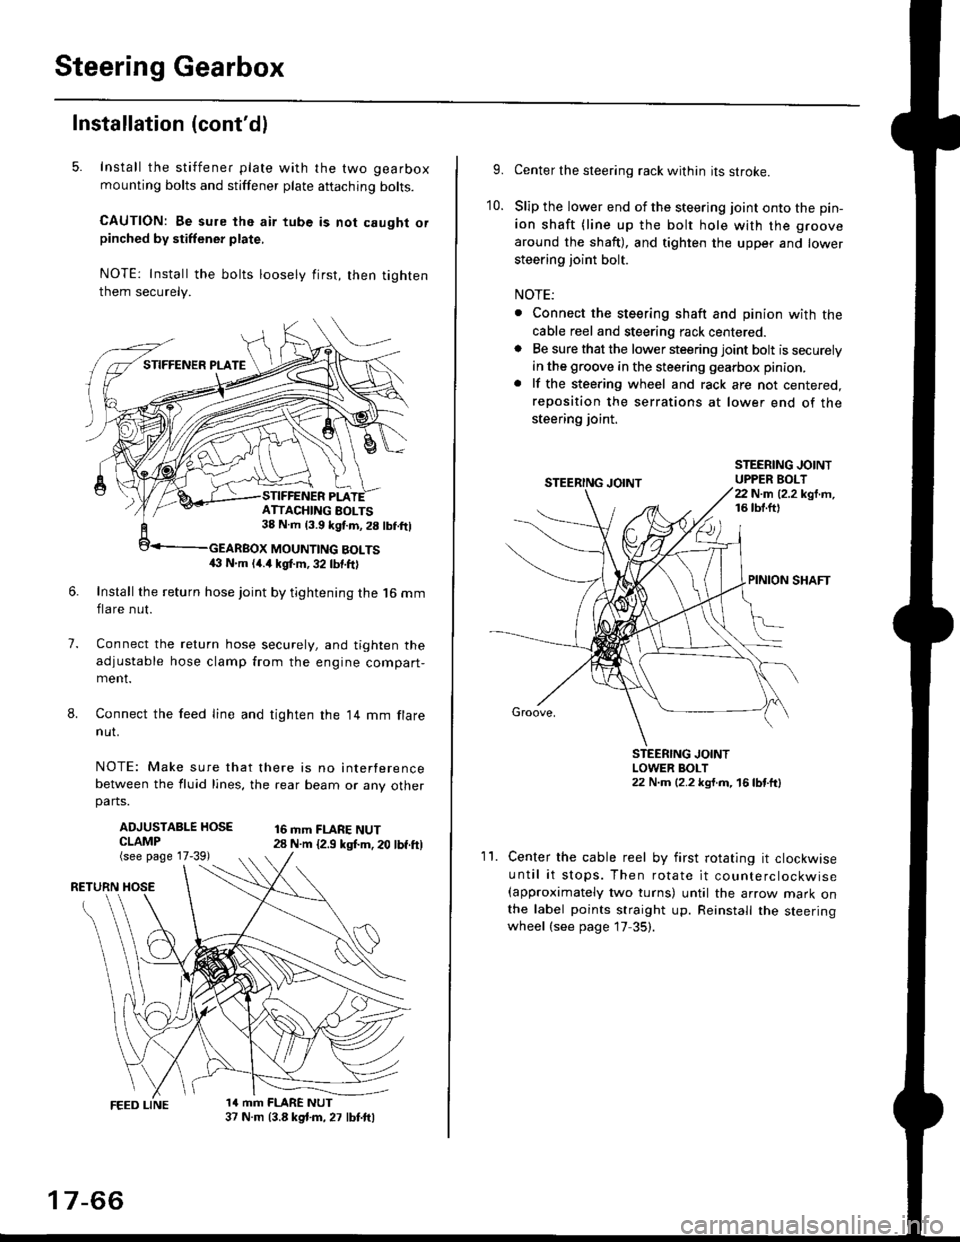 HONDA CIVIC 1996 6.G Service Manual Steering Gearbox
Installation (contdl
5. Install the stiffener plate with the two gearbox
mounting bolts and stiffener plate aftaching bolts.
CAUTION: Be sure the air tube is not caught orpinched by 